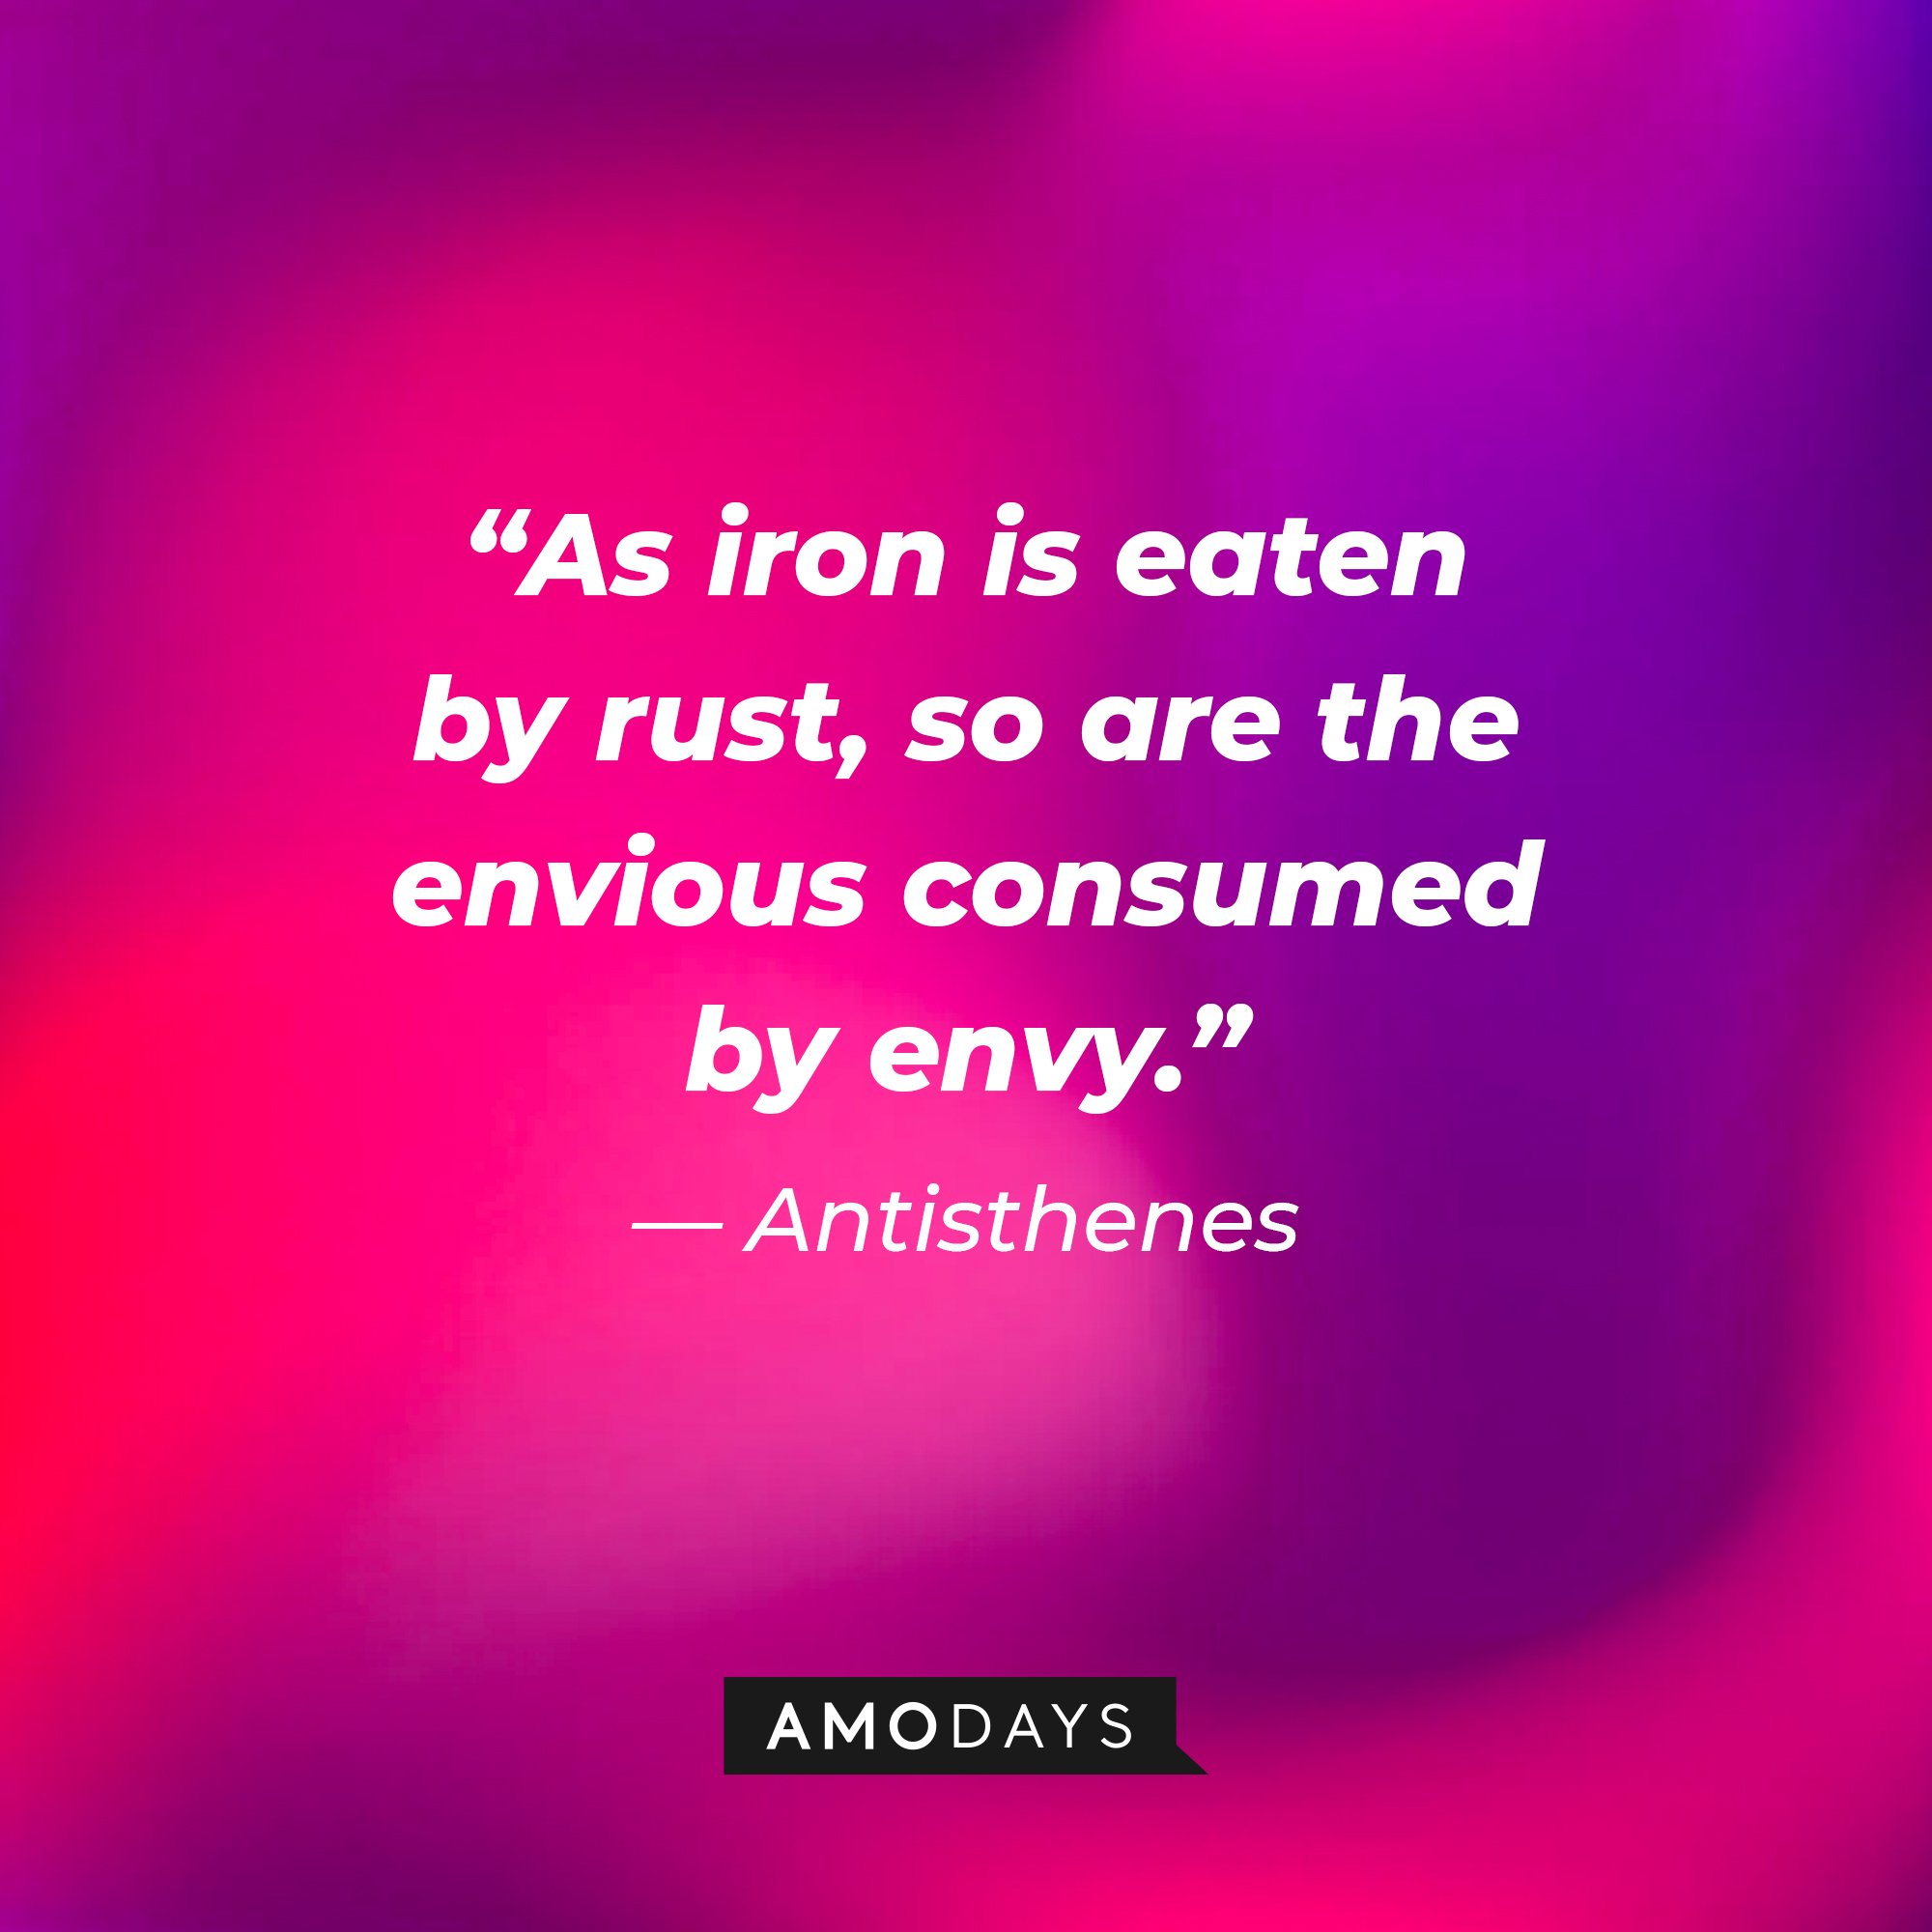 Antisthenes's quote: “As iron is eaten by rust, so are the envious consumed by envy.” | Image: AmoDays